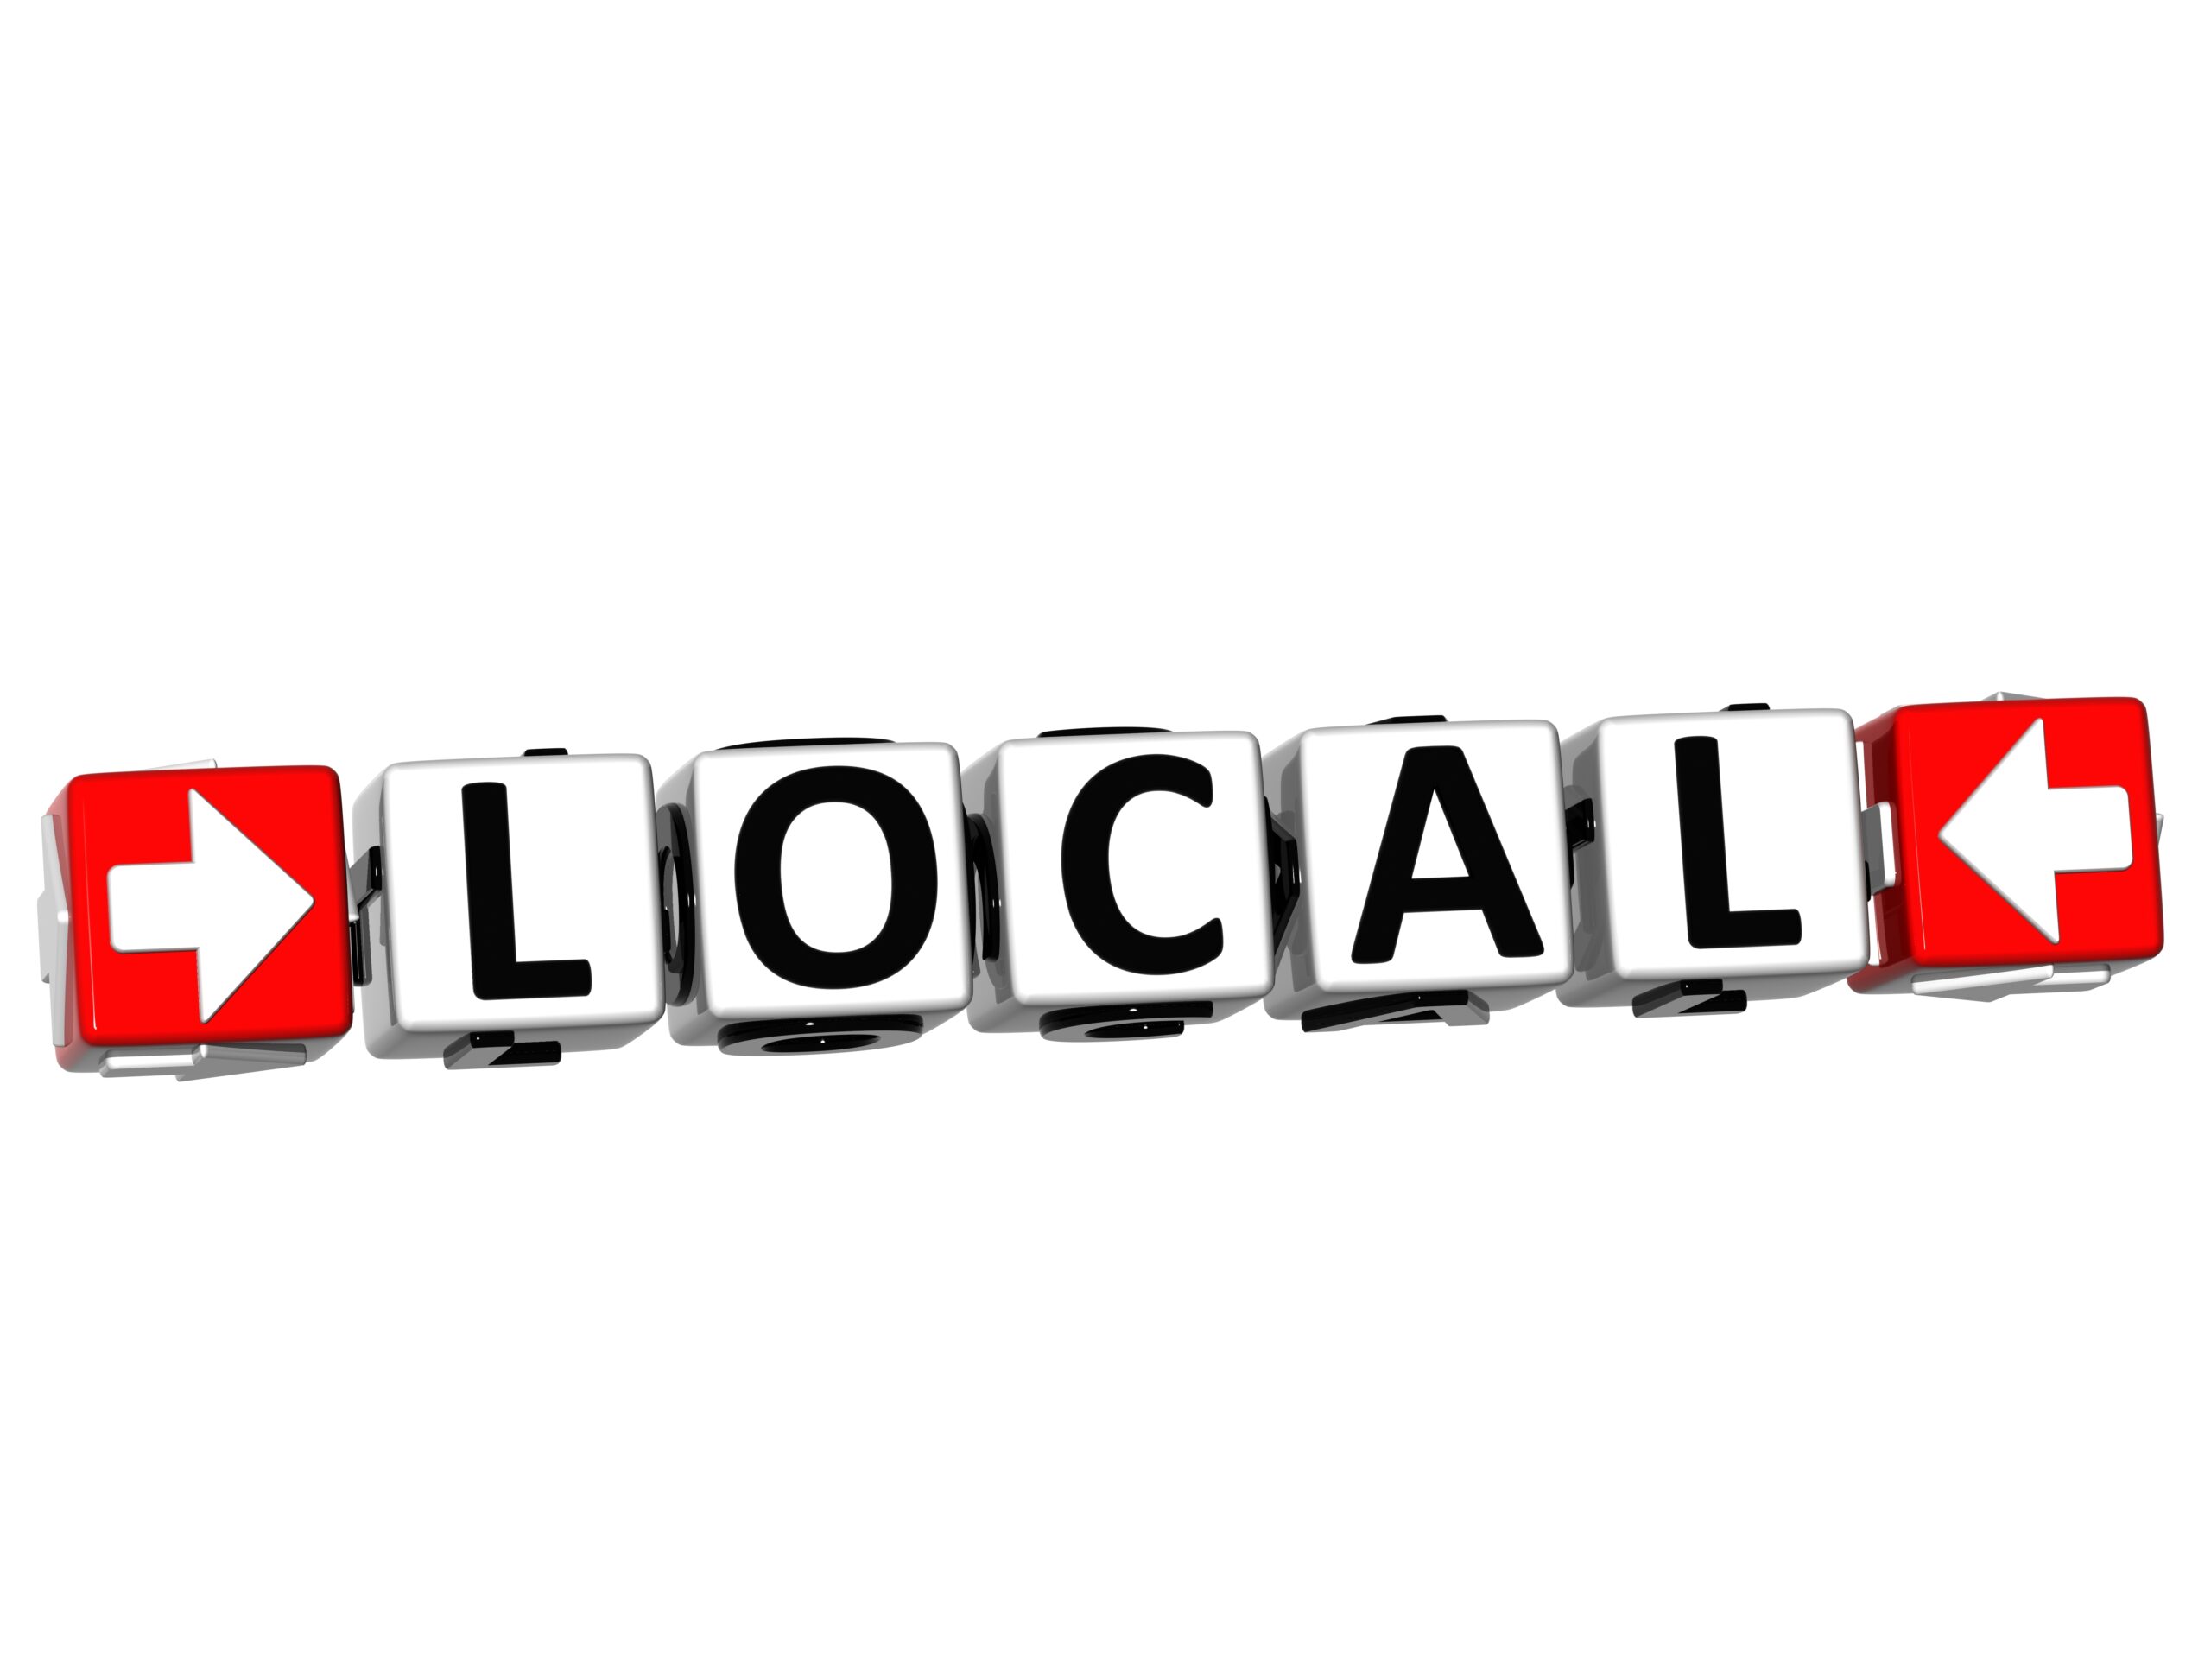 Location-based apps give readers valuable information about local offerings.